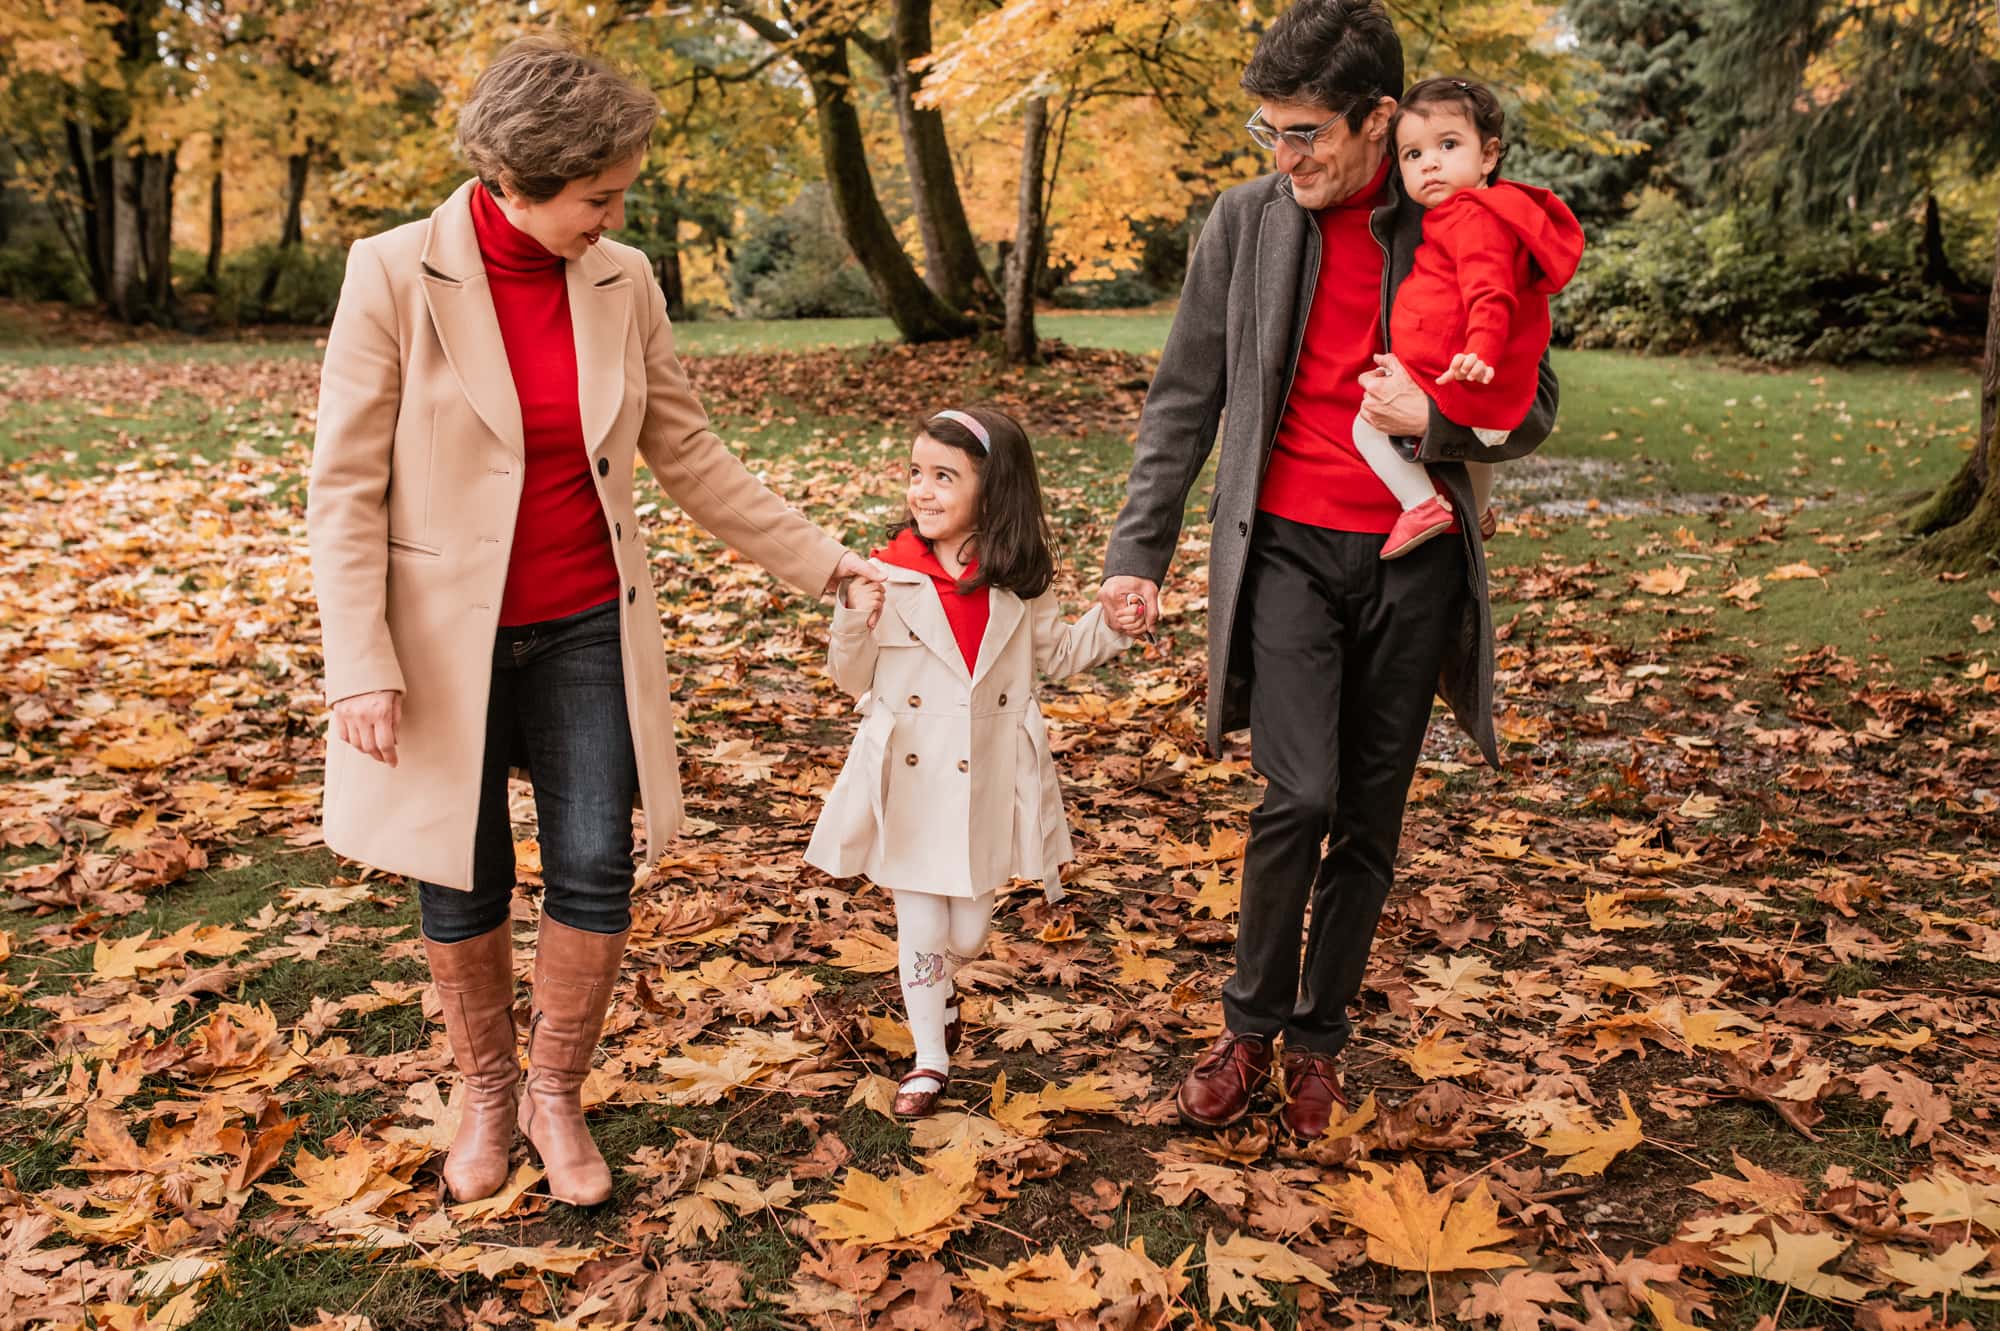 Family of 4 walks through the fall leaves in Cates Park in North Vancouver.